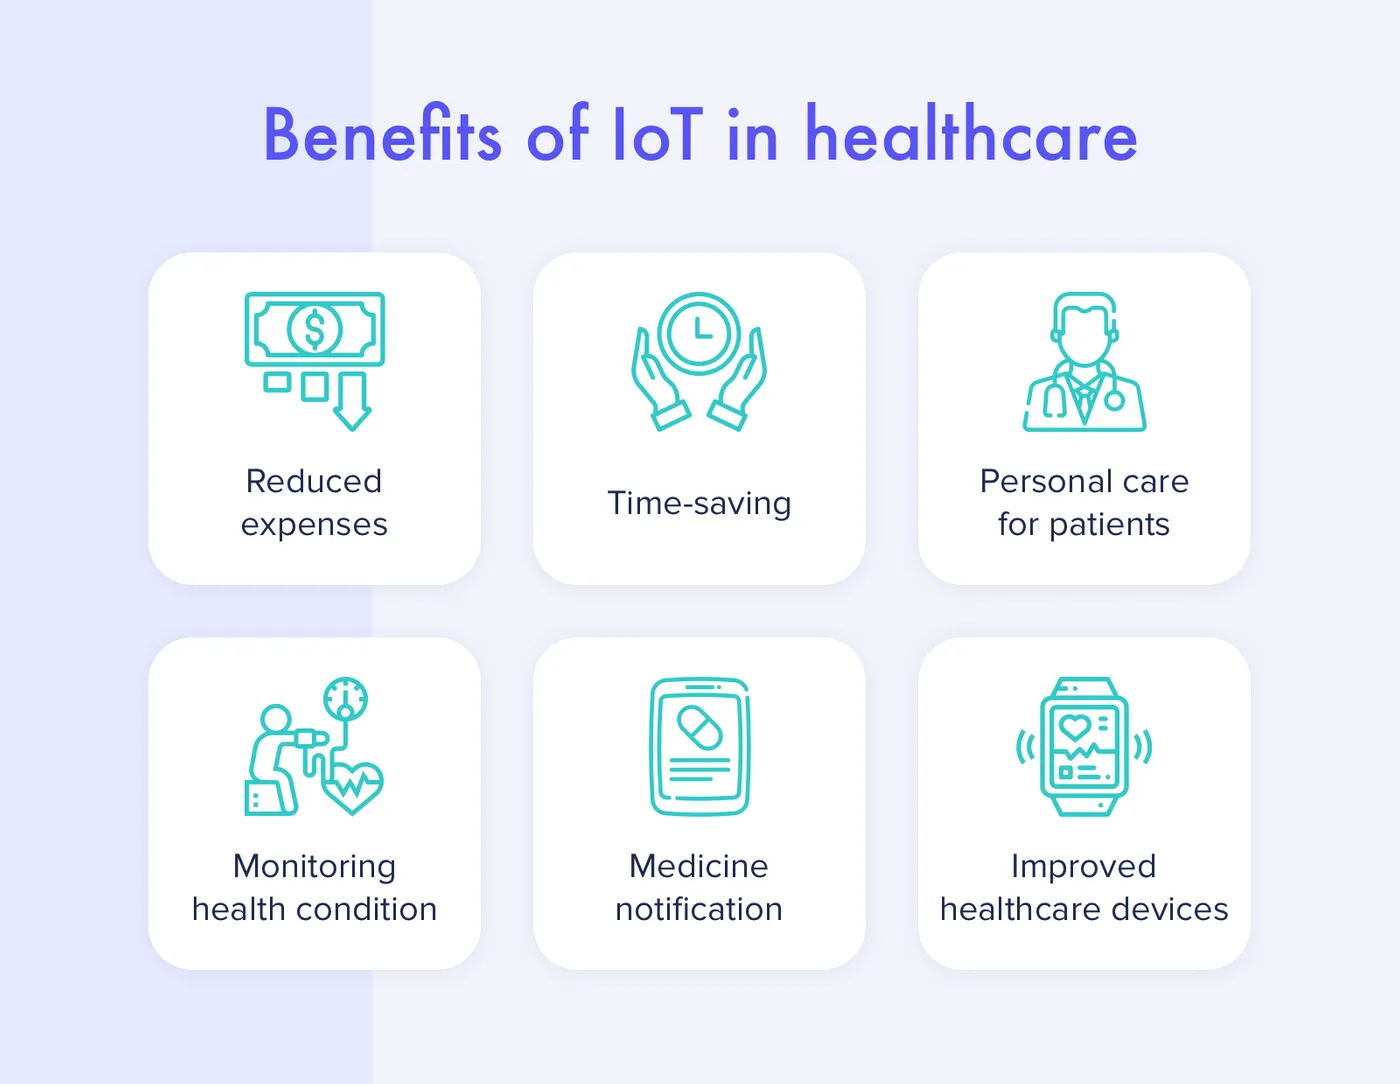 IoT opportunities for healthcare